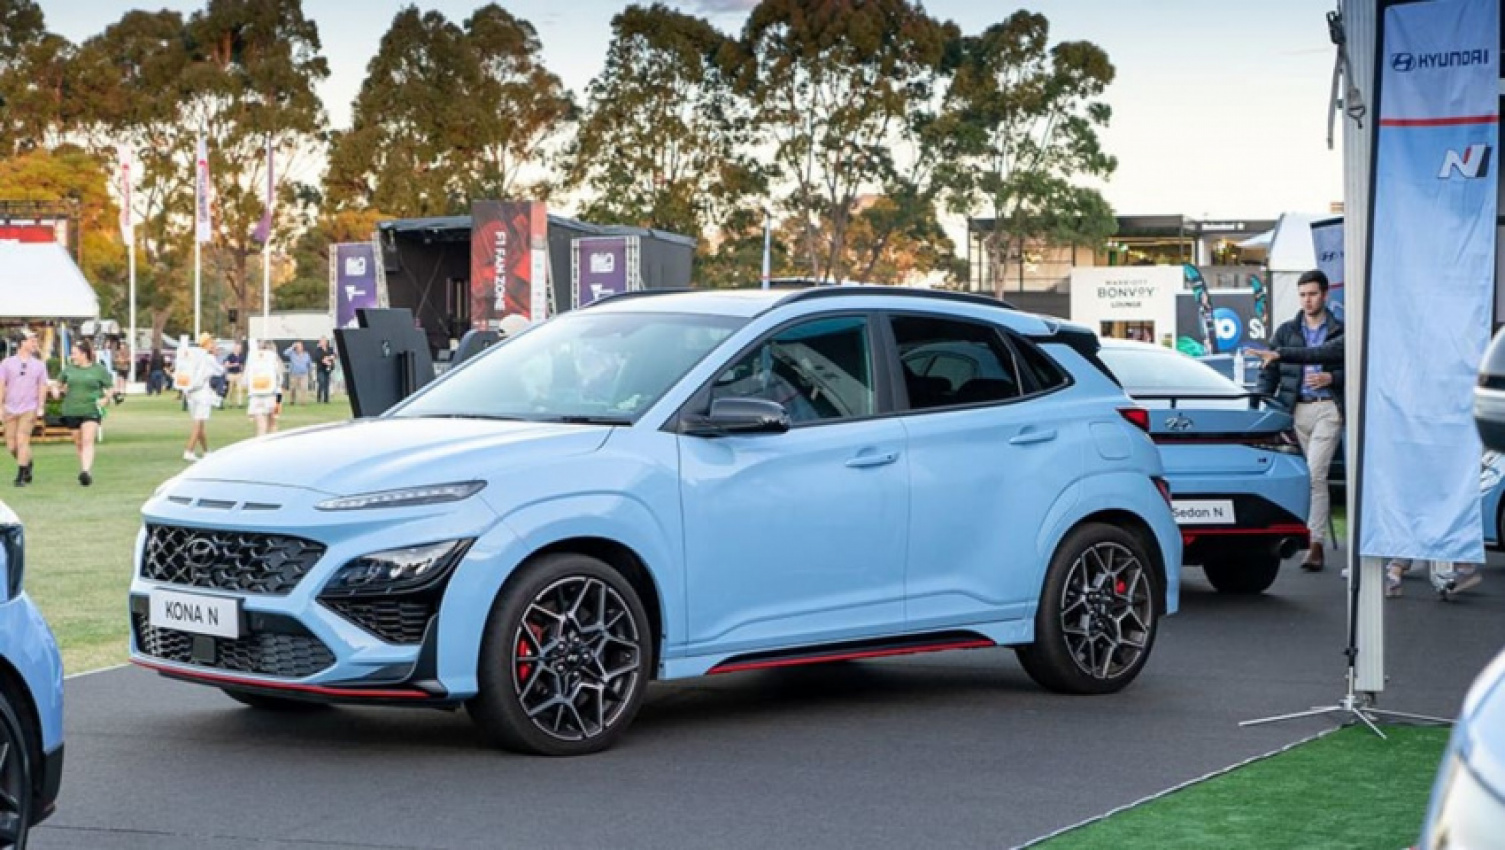 autos, cars, hyundai, hatchback, hot hatches, hyundai hatchback range, hyundai i20, hyundai i20 2022, hyundai i30, hyundai i30 2022, hyundai kona, hyundai kona 2022, hyundai news, hyundai suv range, industry news, showroom news, 2022 hyundai i20 n, i30 n hatchback and kona n now more expensive to buy: still a bargain for those looking for cheap thrills?